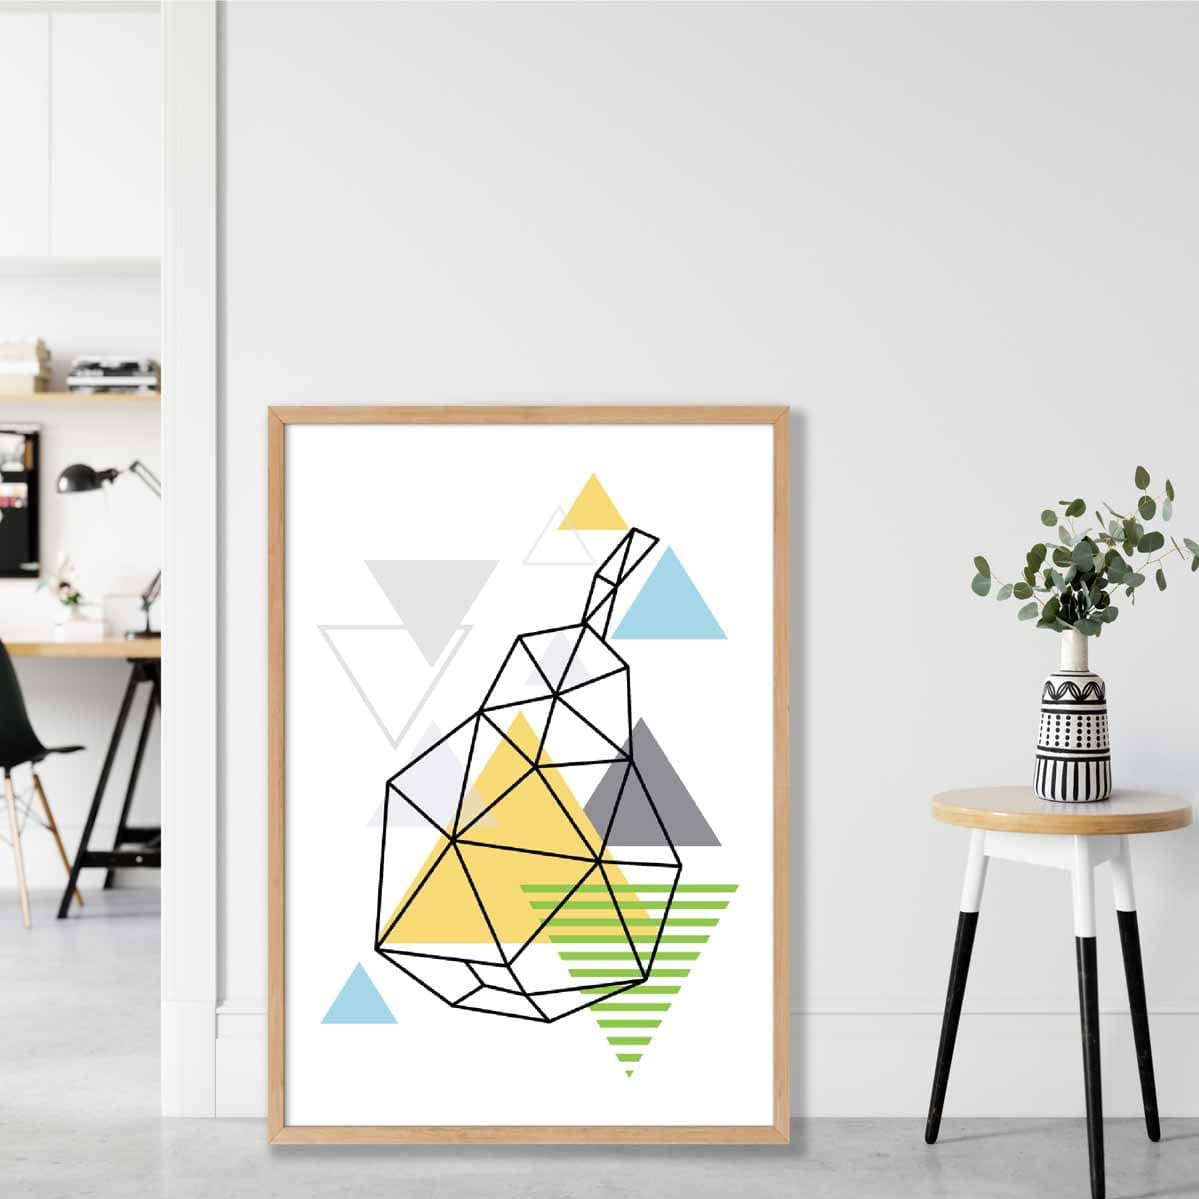 Geometric Fruit Line Art Poster of Pear in Yellow Blue Green